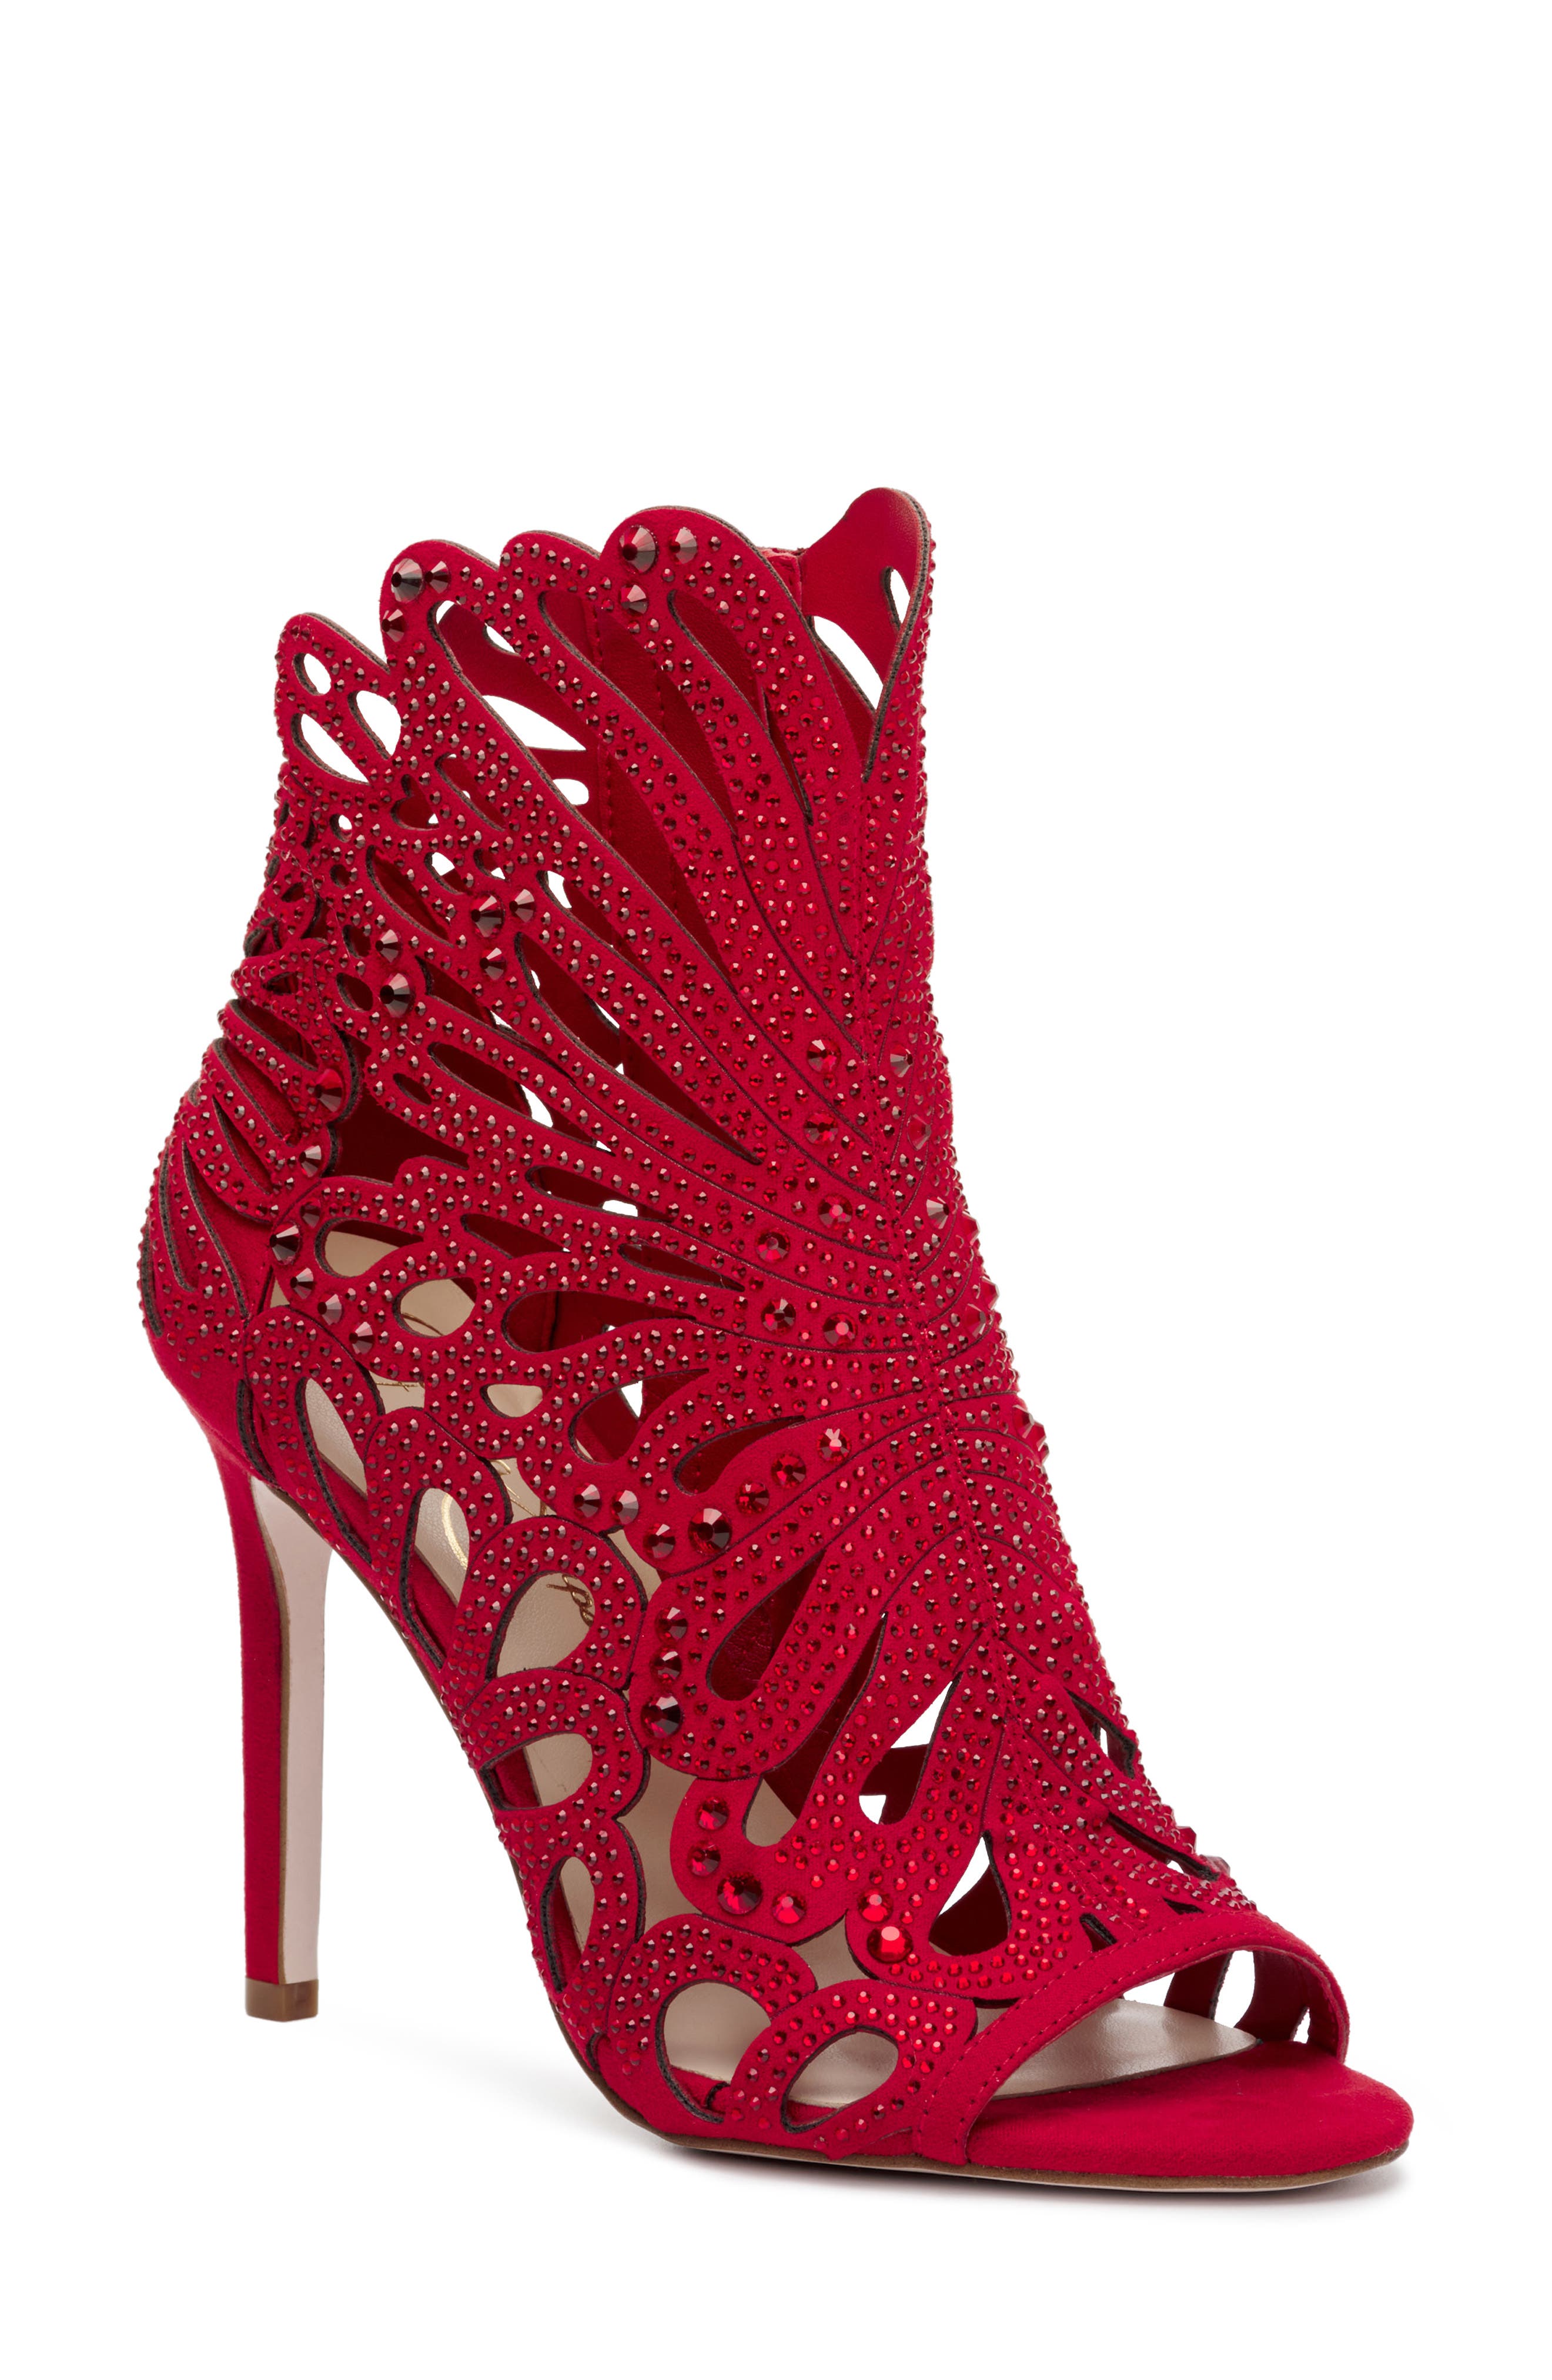 Asire Boot in Lux Red – Jessica Simpson